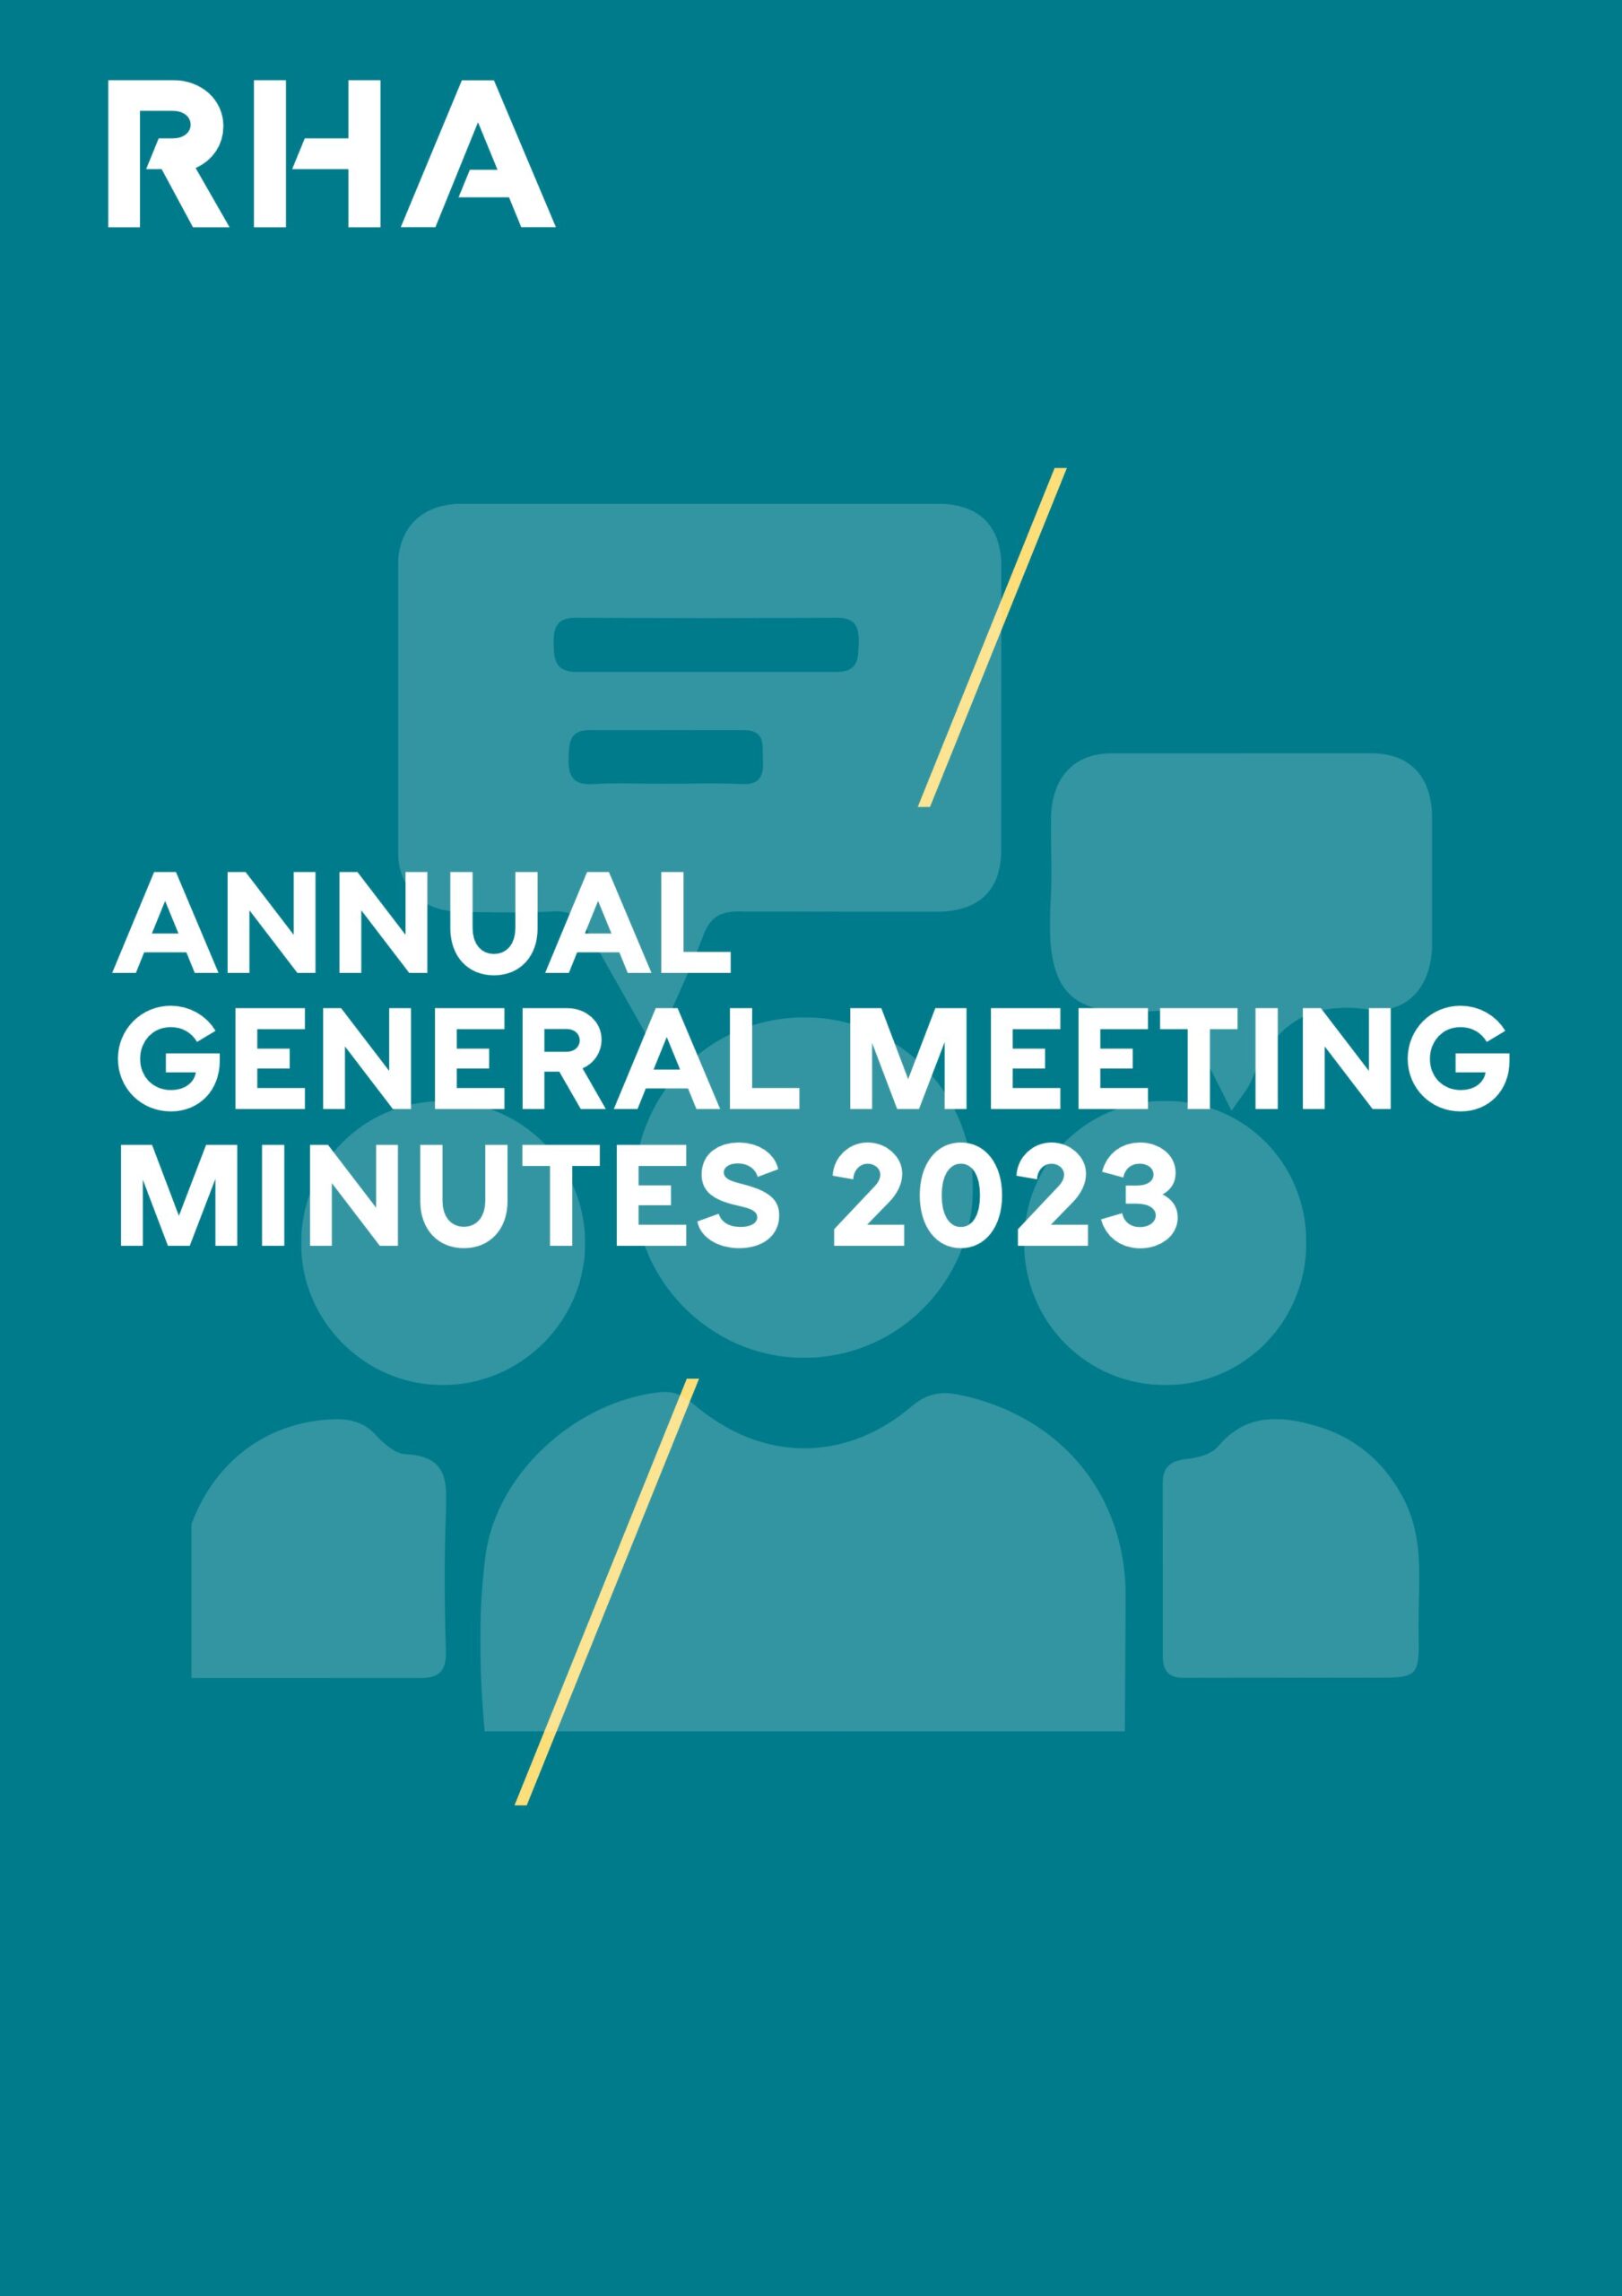 Annual General Meeting Minutes 2023